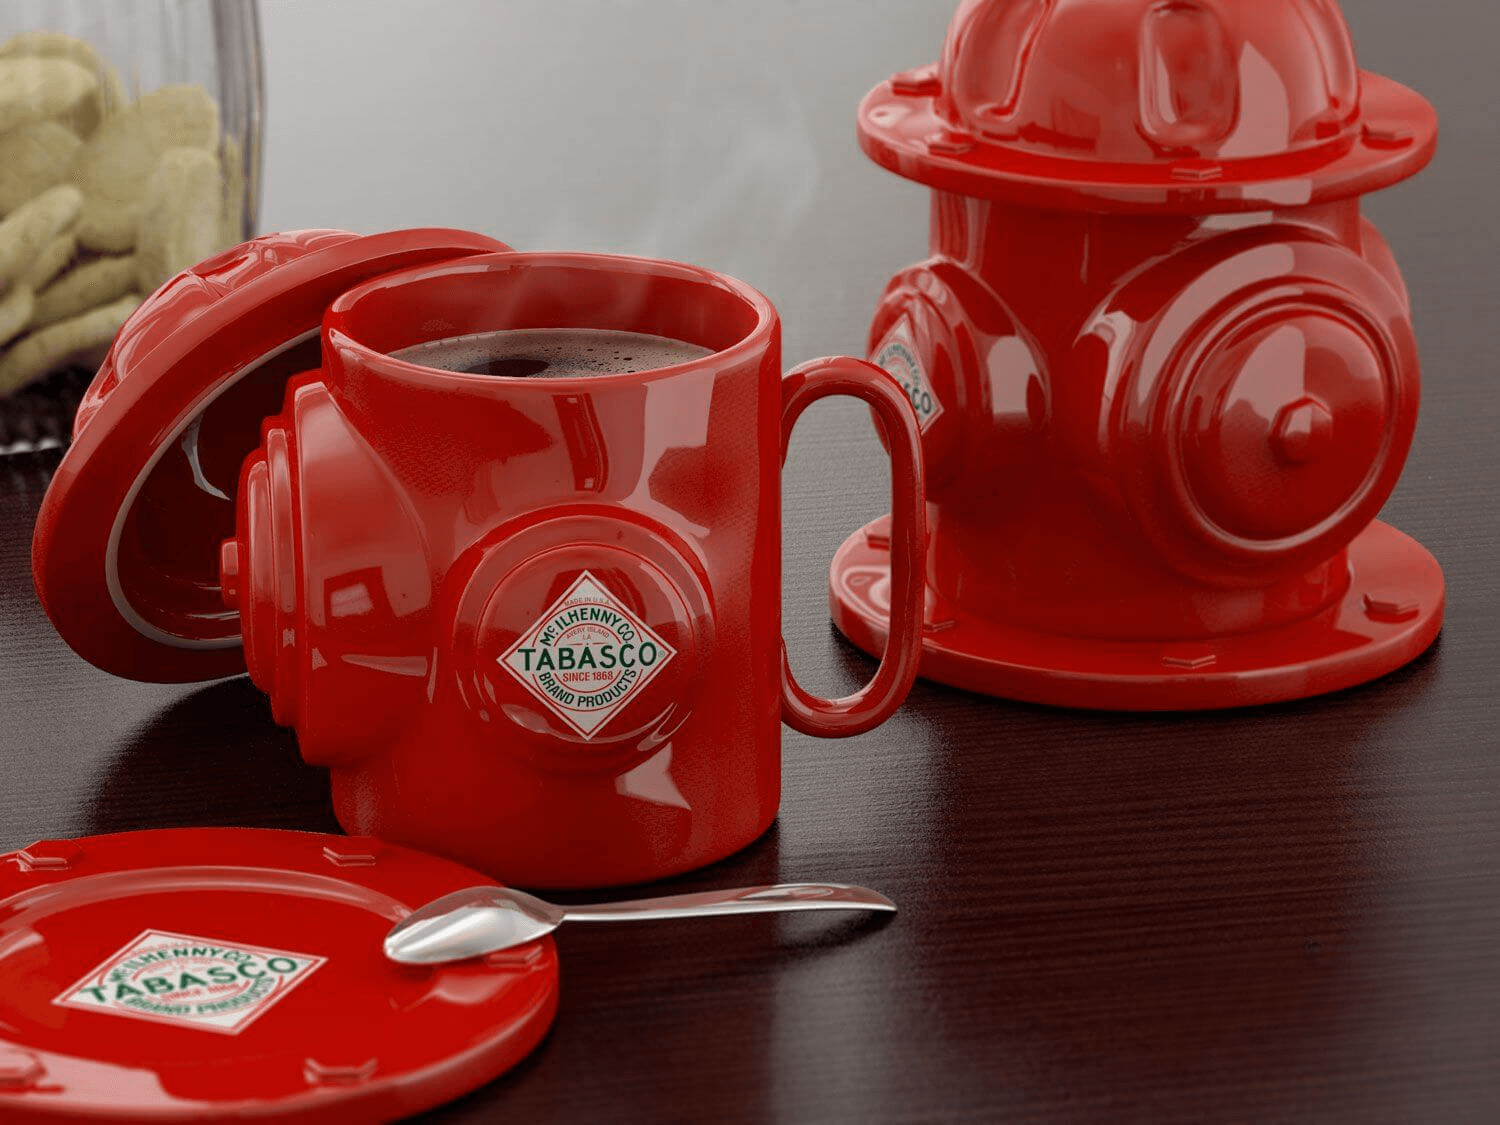 Top 10 Gift Ideas for Firefighter Crews